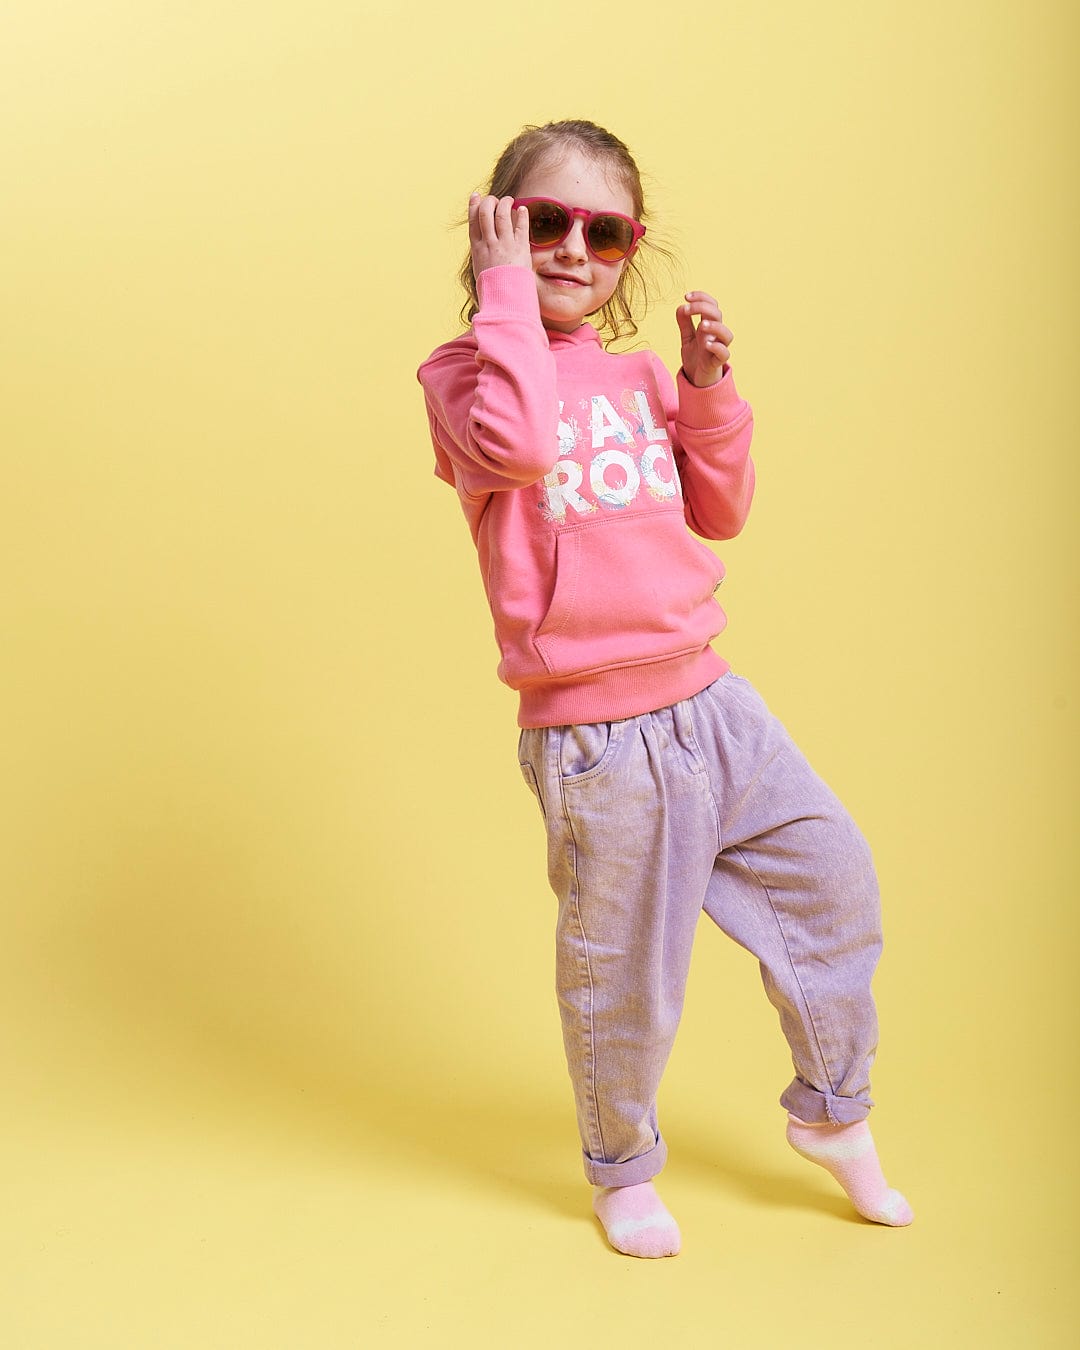 A girl wearing Saltrock sunglasses and a Seabed - Kids Pop Hoodie - Pink sweatshirt on a yellow background.